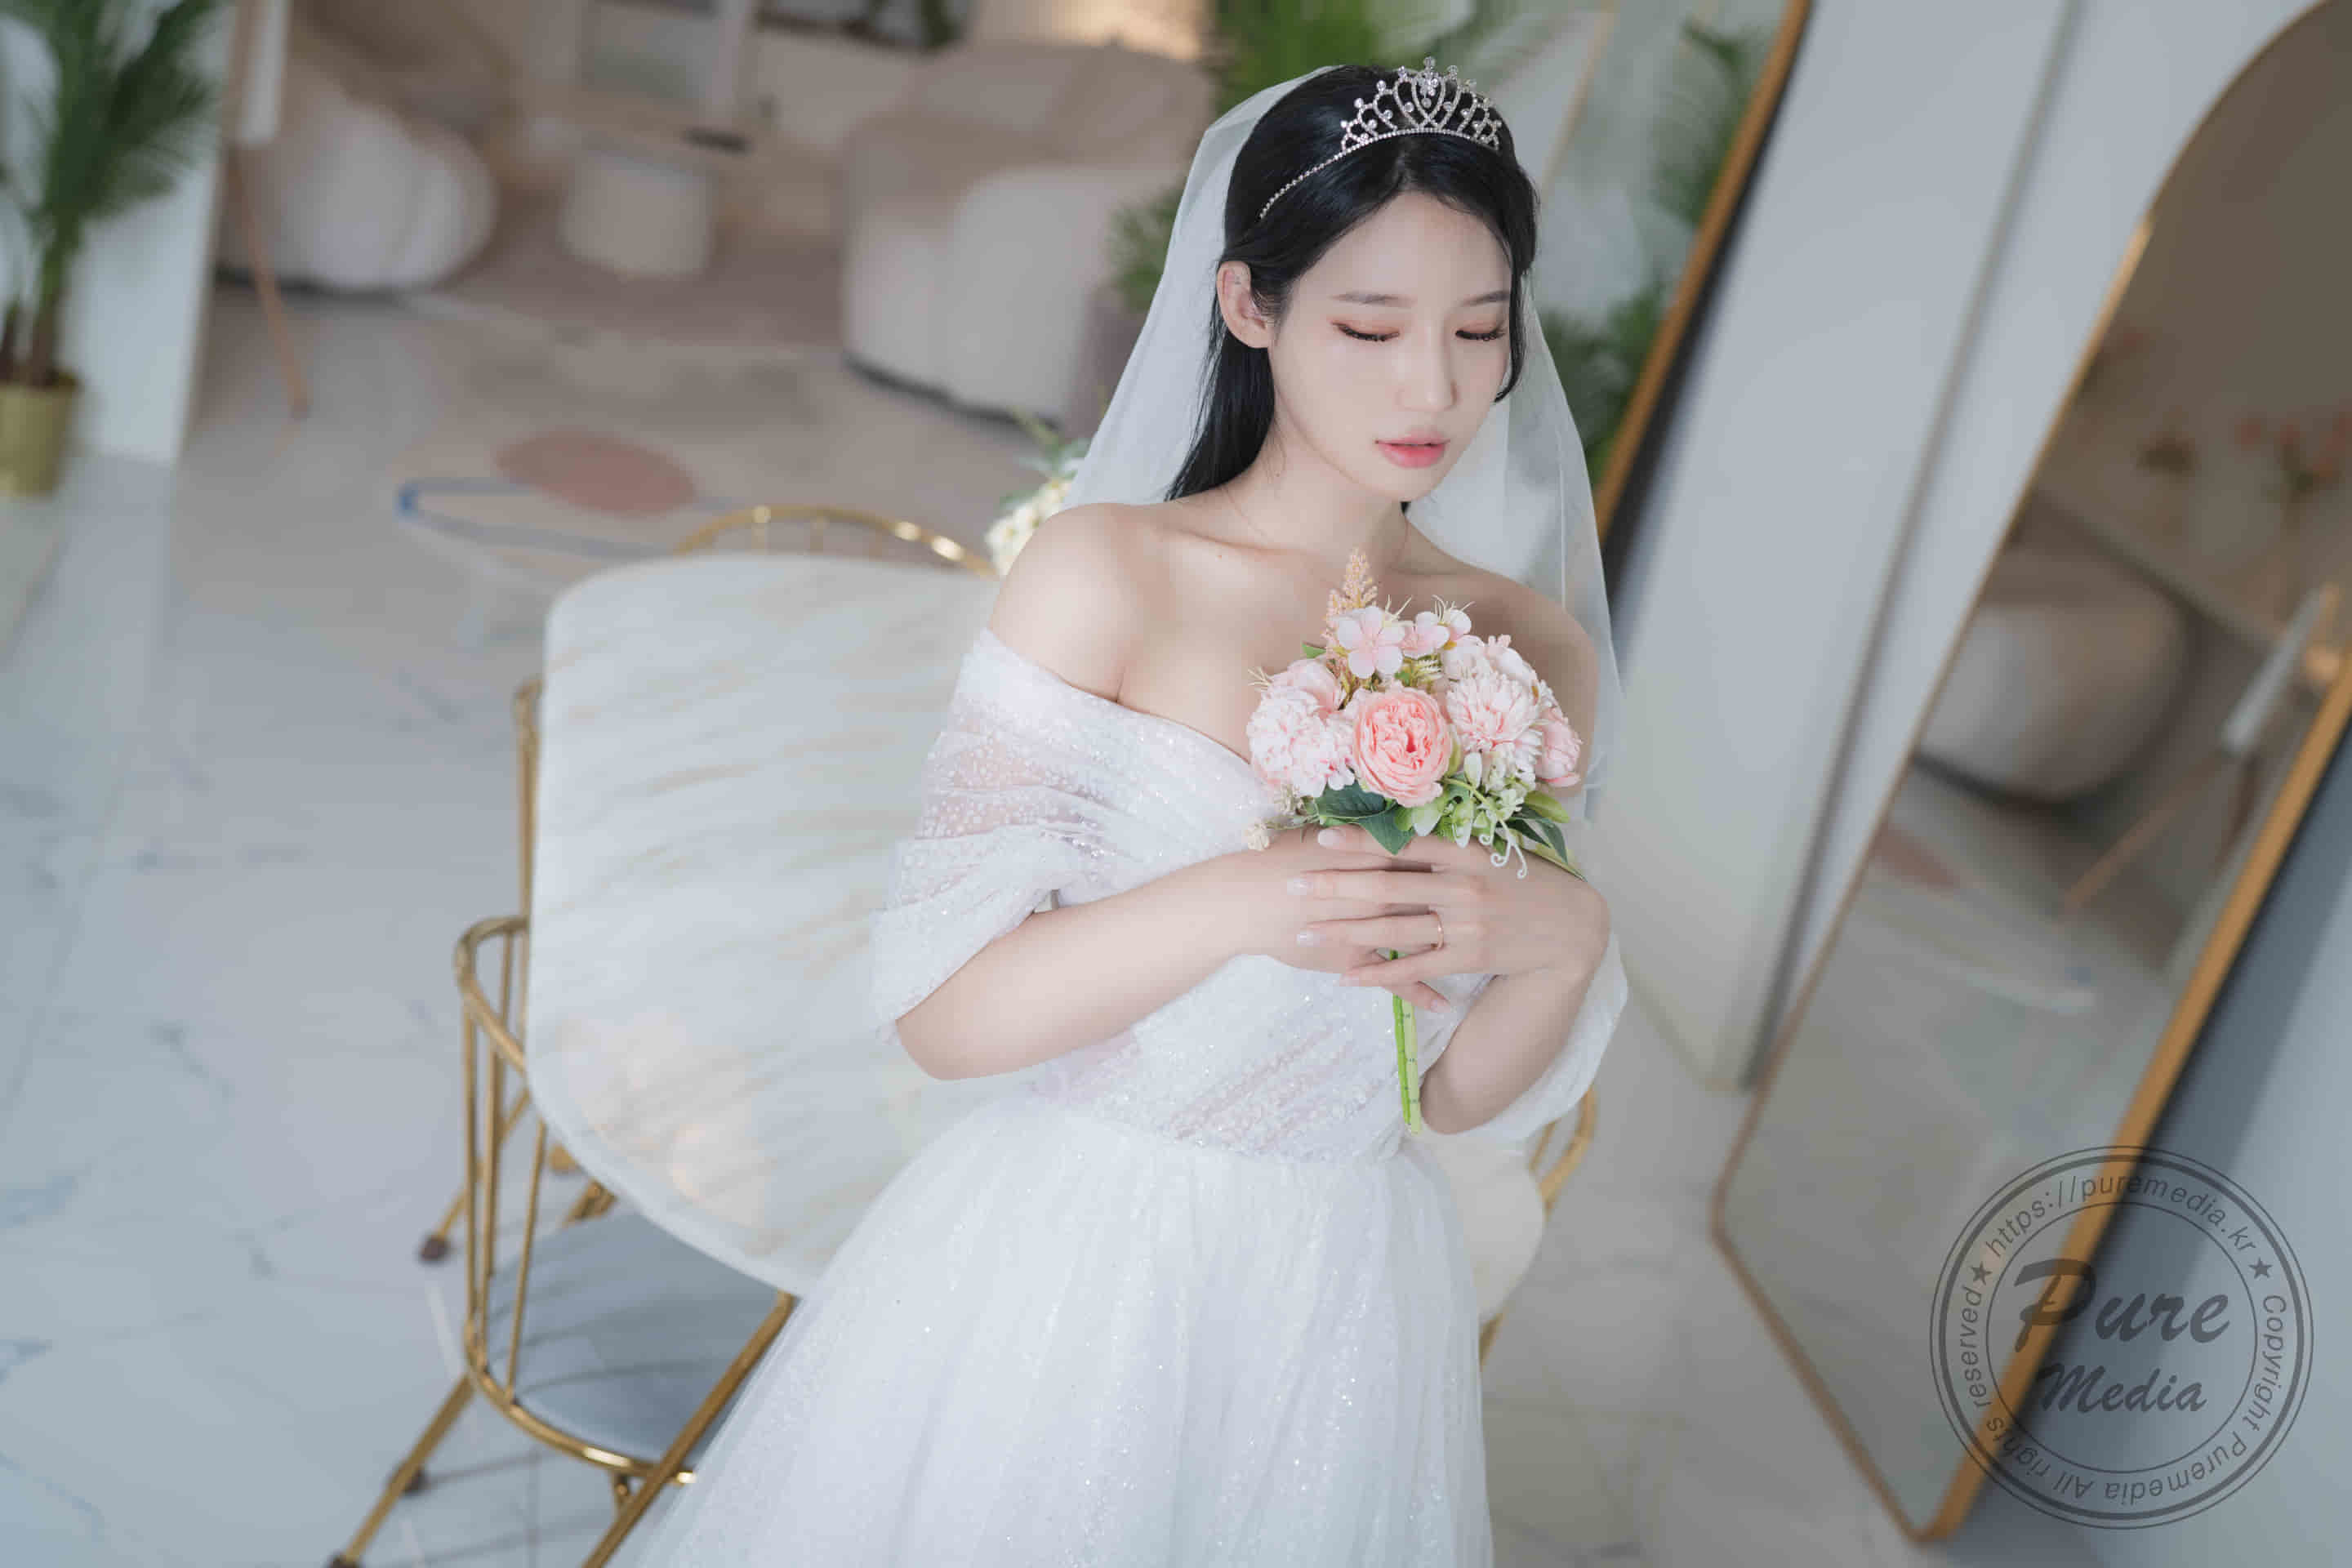 Worth 40 US dollars Korean high-end photography top goddess Yeha married the bride